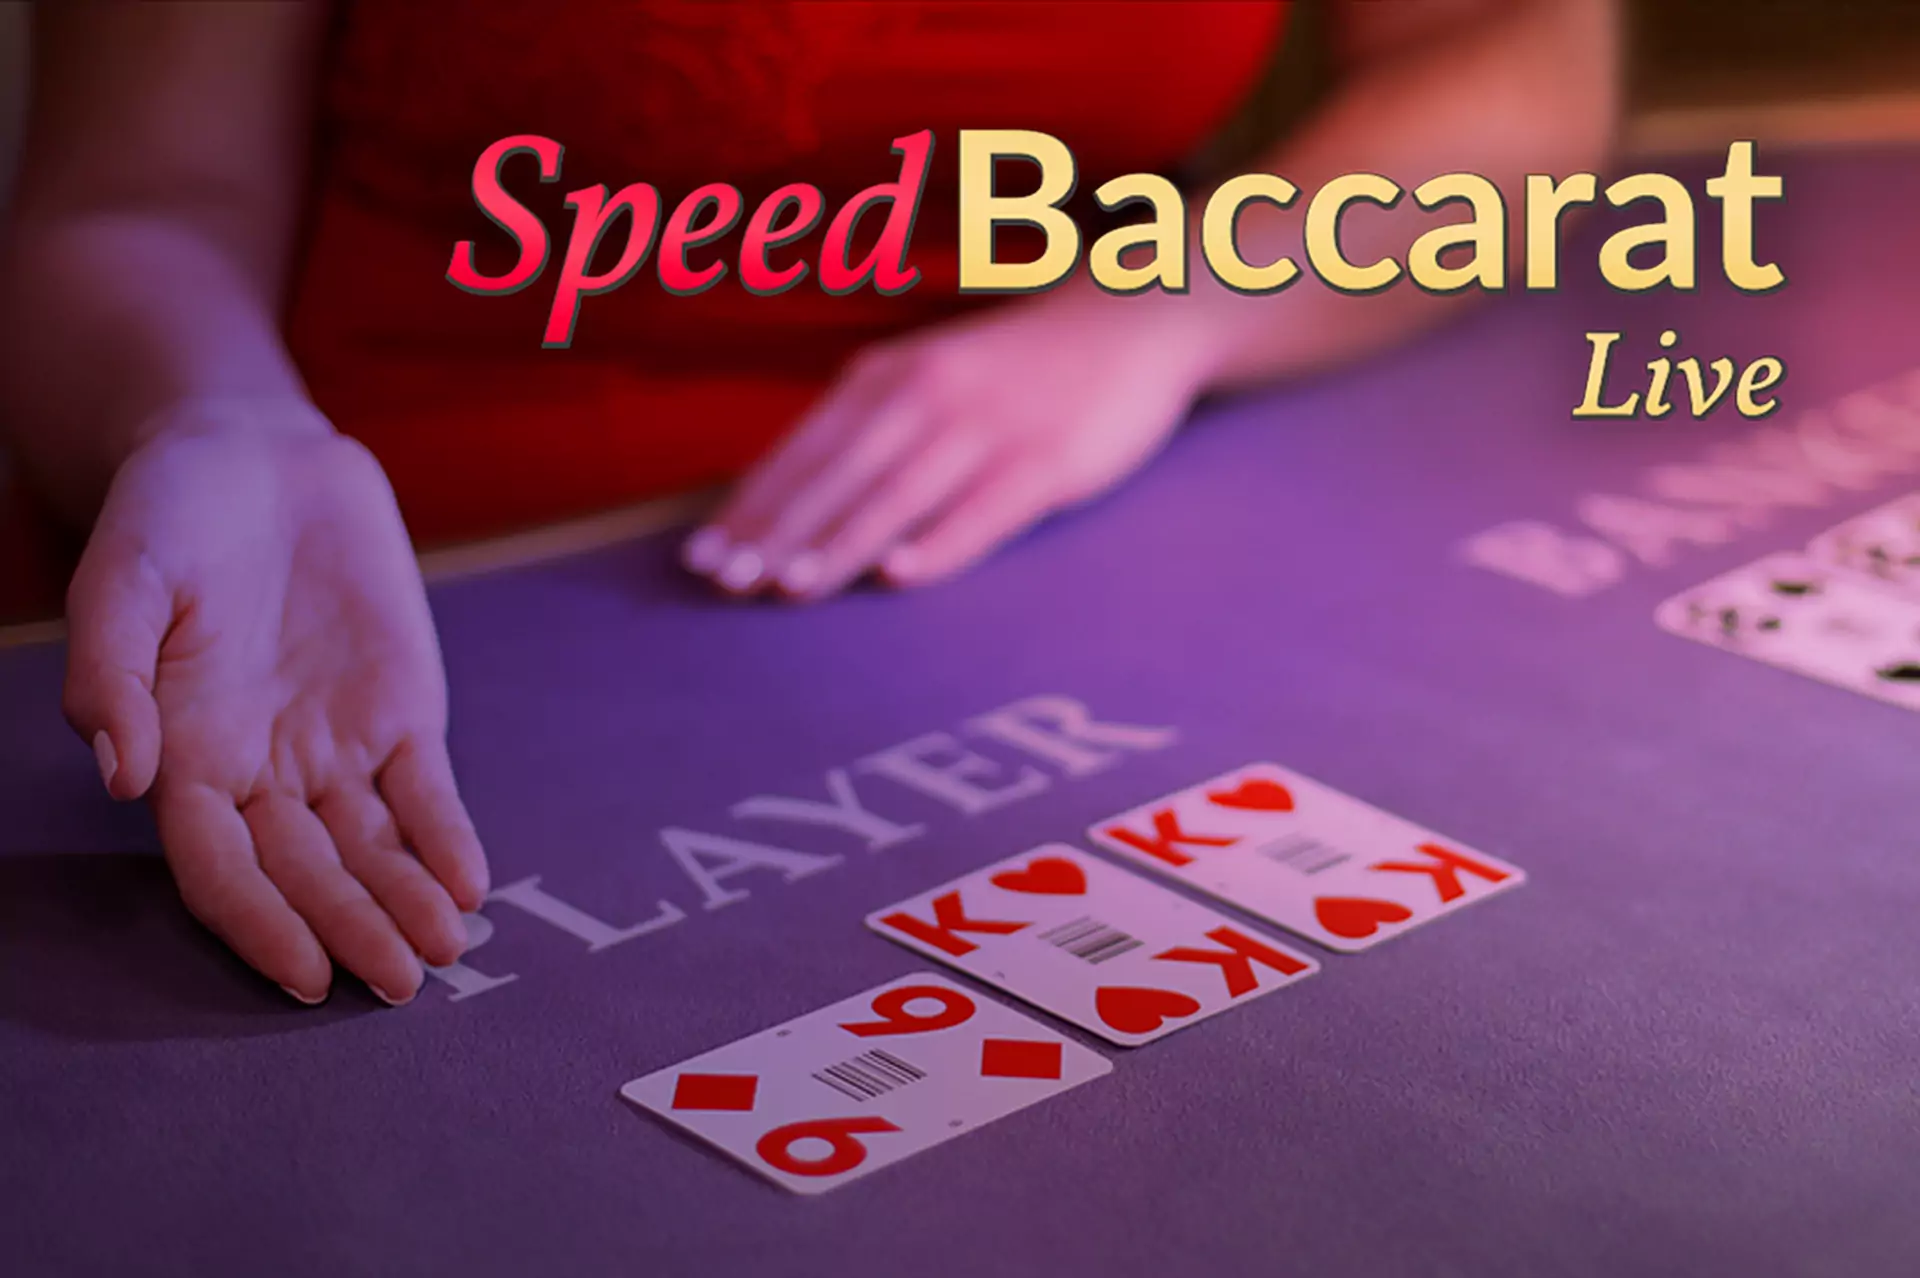 Baccarat is a traditional game with three options for placing a bet.